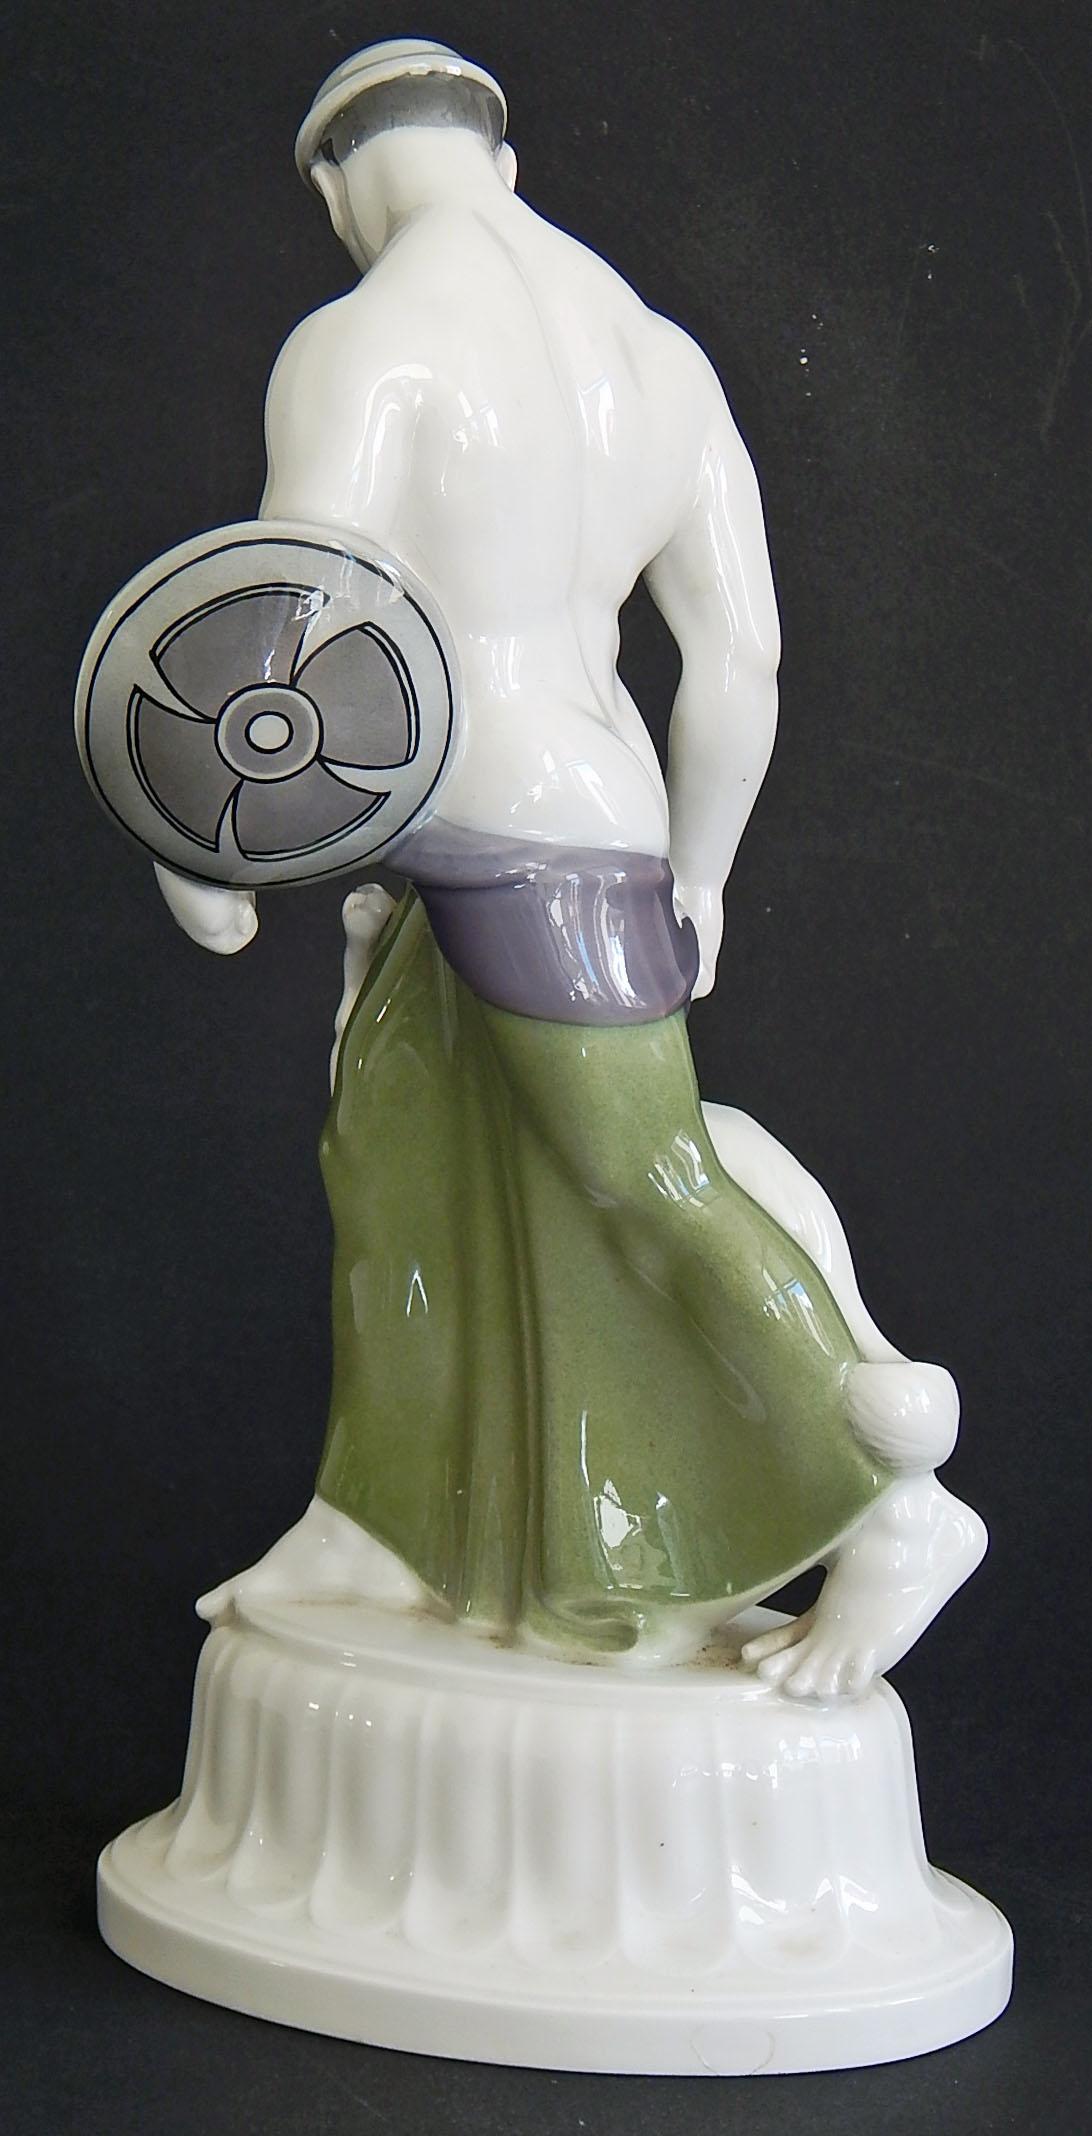 An extraordinary, rare and historic porcelain sculpture, this depiction of a half-nude Goth with a greyhound by his side was sculpted by Adolf (or Adolph) Amberg for KPM in 1905, to celebrate the wedding of Prussian Crown Prince Wilhelm to Duchess